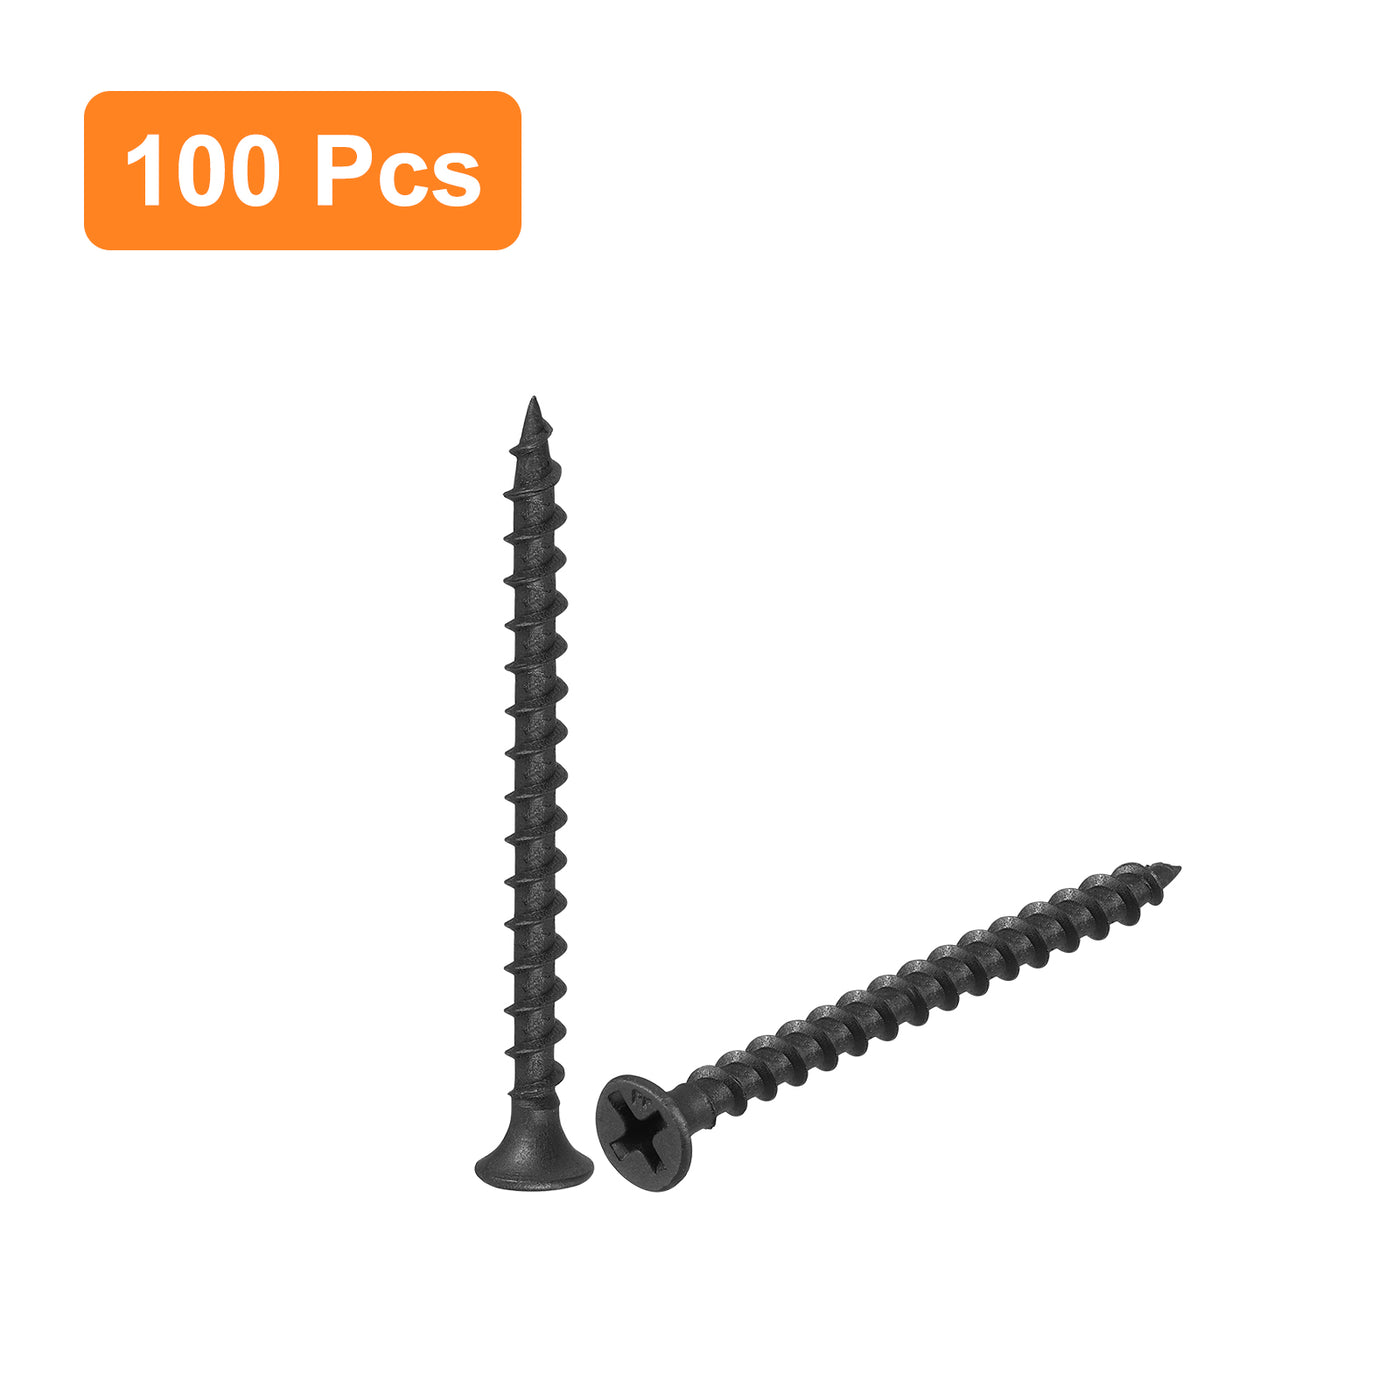 uxcell Uxcell M3.8x50mm 100pcs Phillips Drive Wood Screws, Carbon Steel Self Tapping Screws